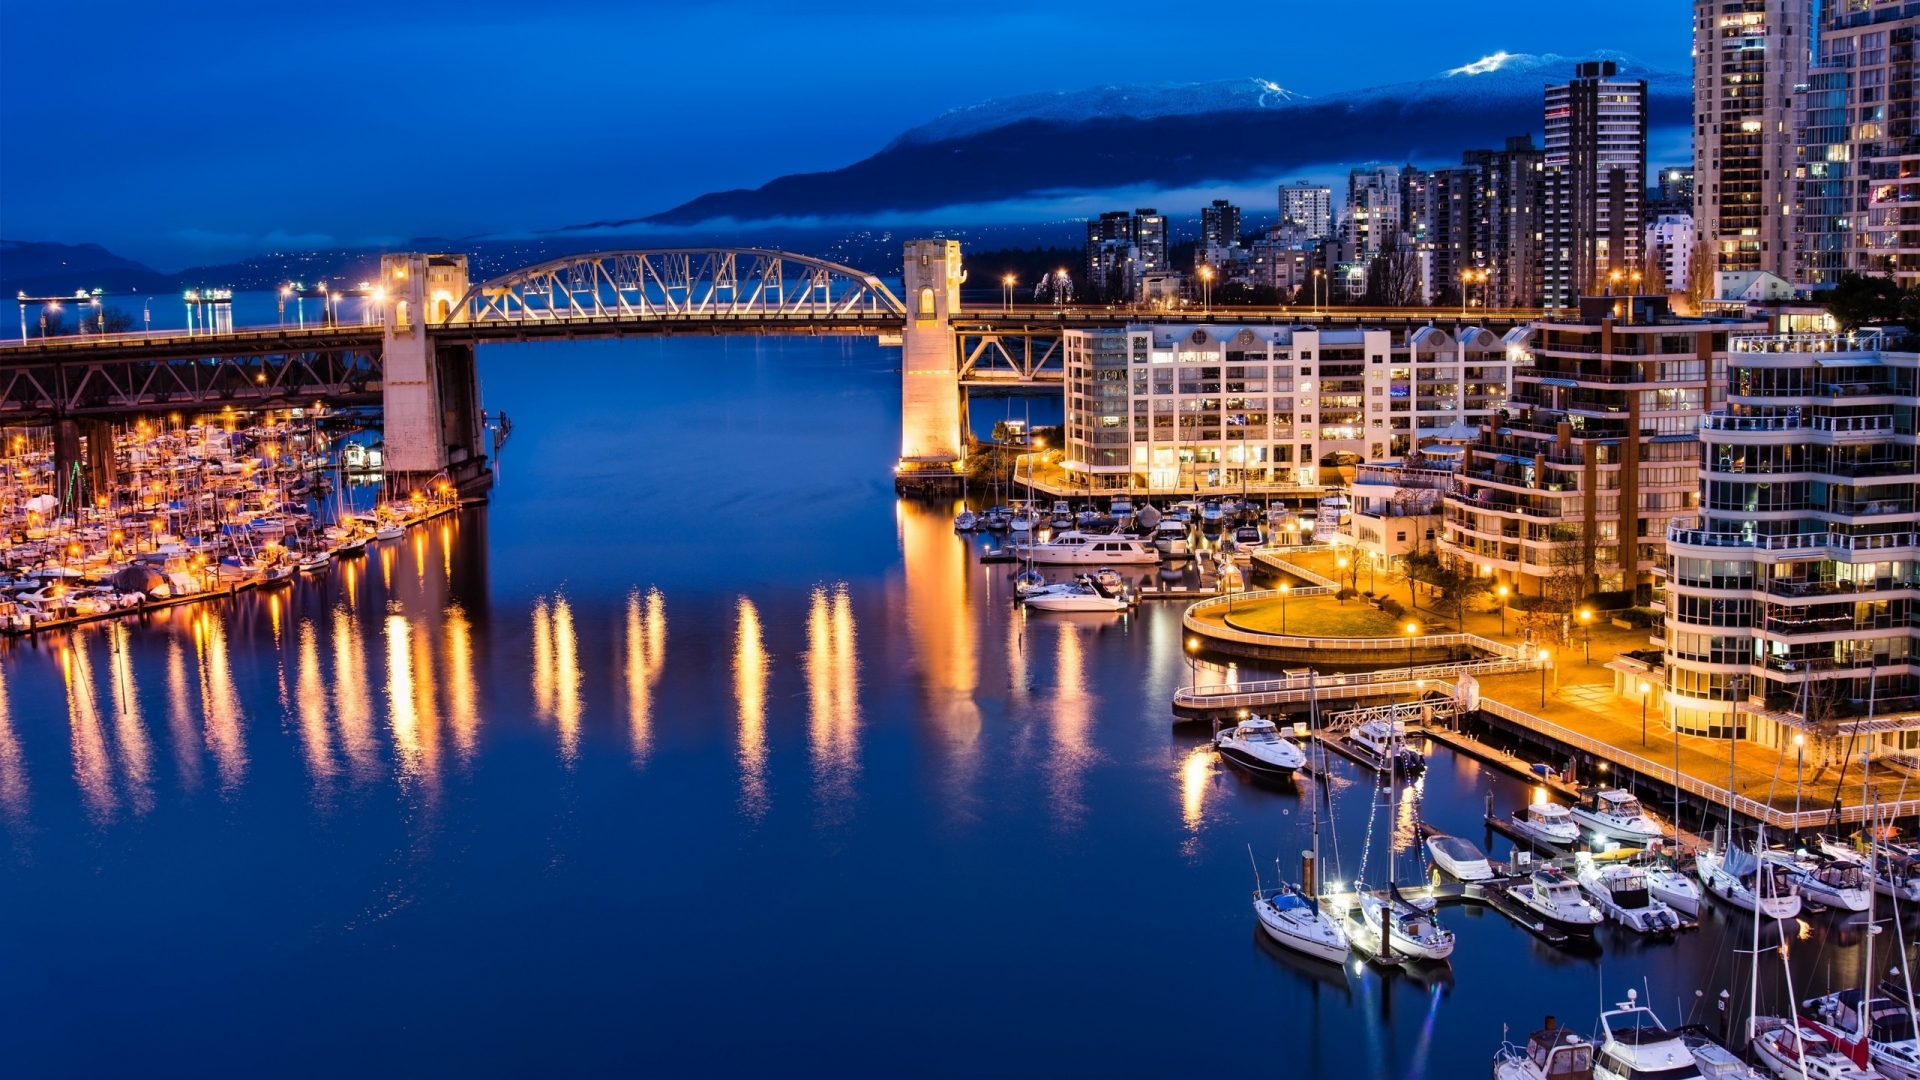 Vancouver Canada Night View for 1920 x 1080 HDTV 1080p resolution